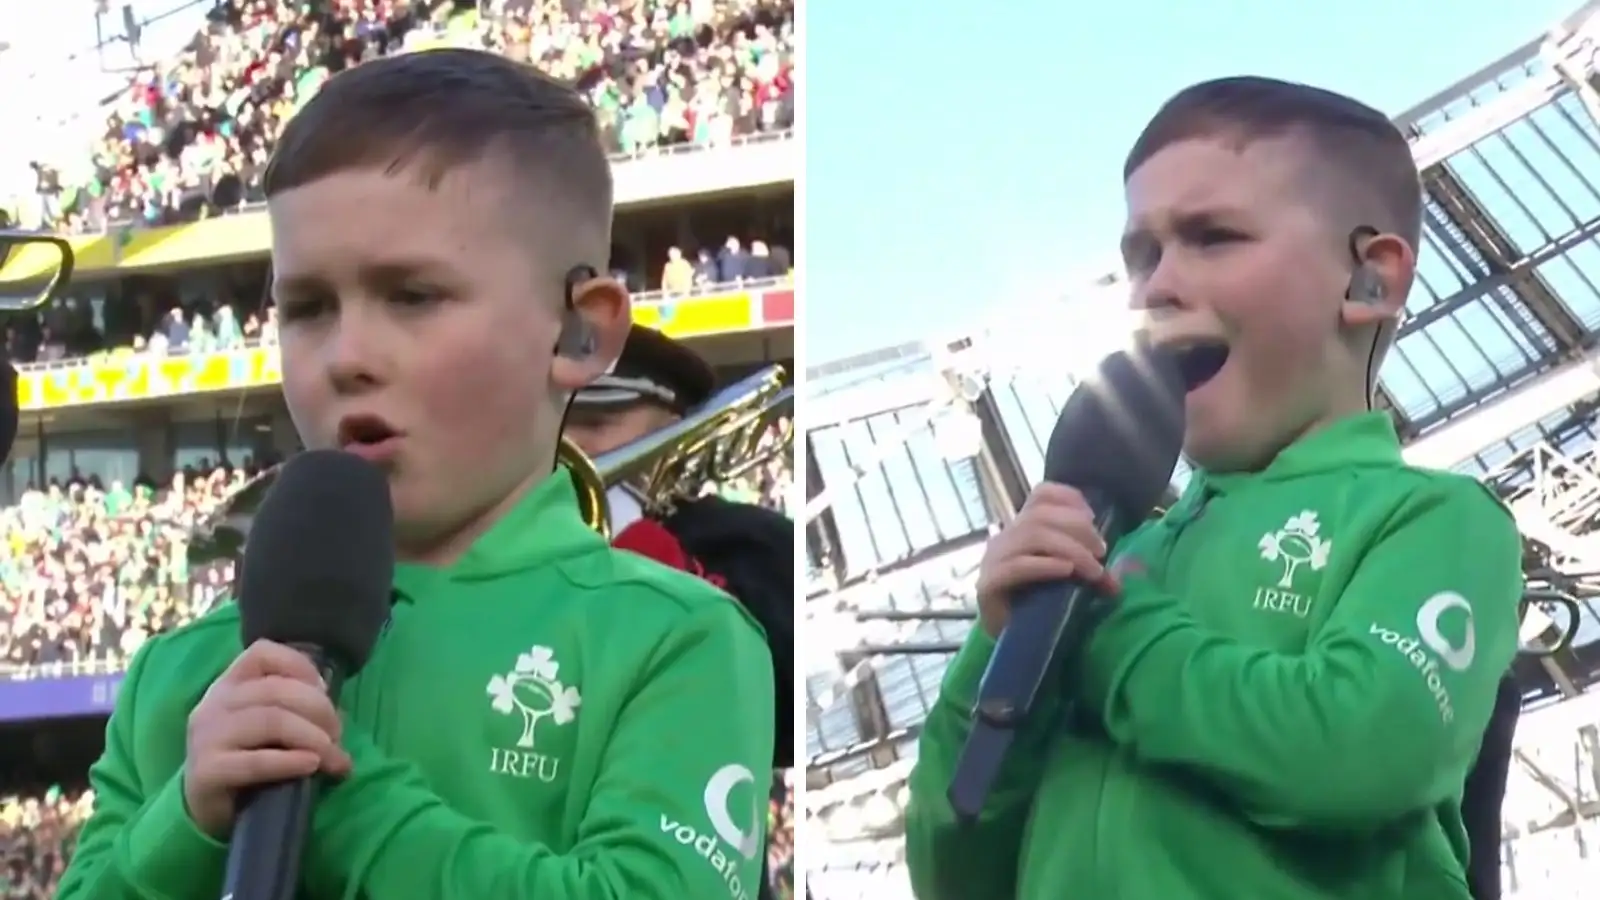 Eight-year-old Stevie Mulrooney performing Ireland's Call ahead of the Six Nations clash between Ireland and Italy at the Aviva Stadium in Dublin.